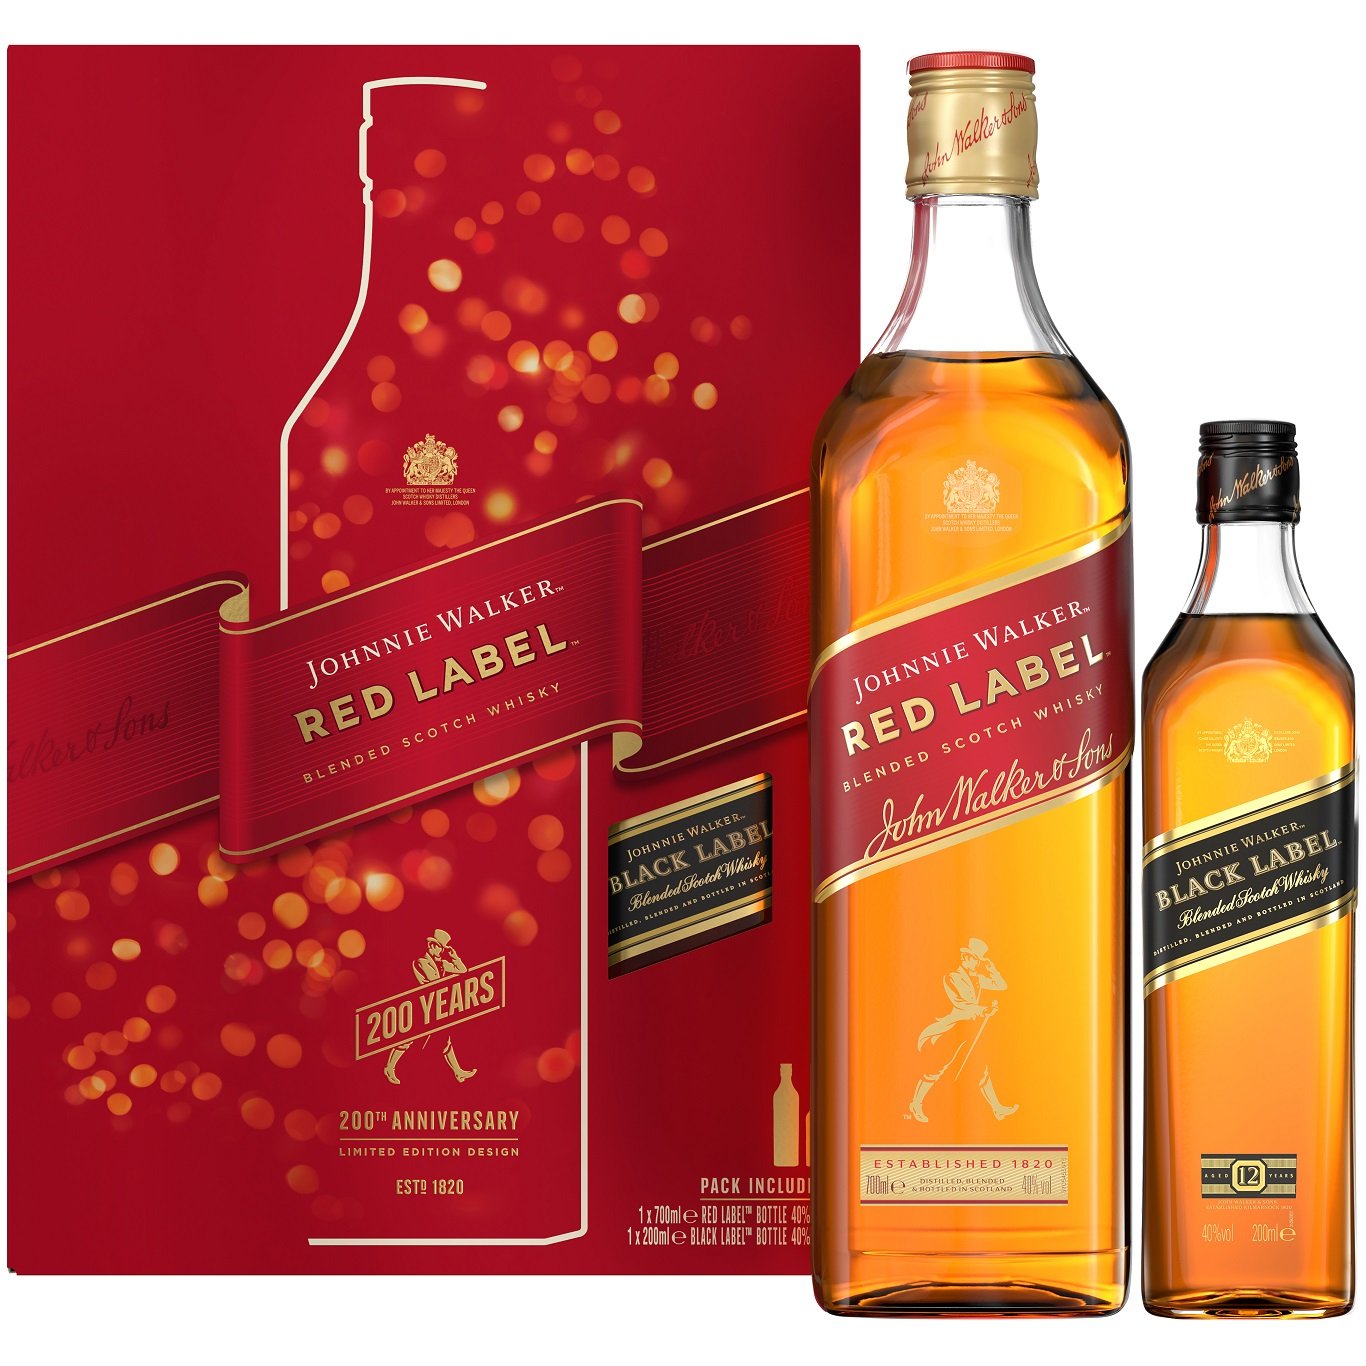 Виски Johnnie Walker Red Label Blended Scotch Whisky, 40%, 0,7 л + Виски Johnnie Walker Black Label, 40%, 0,2 л - фото 2